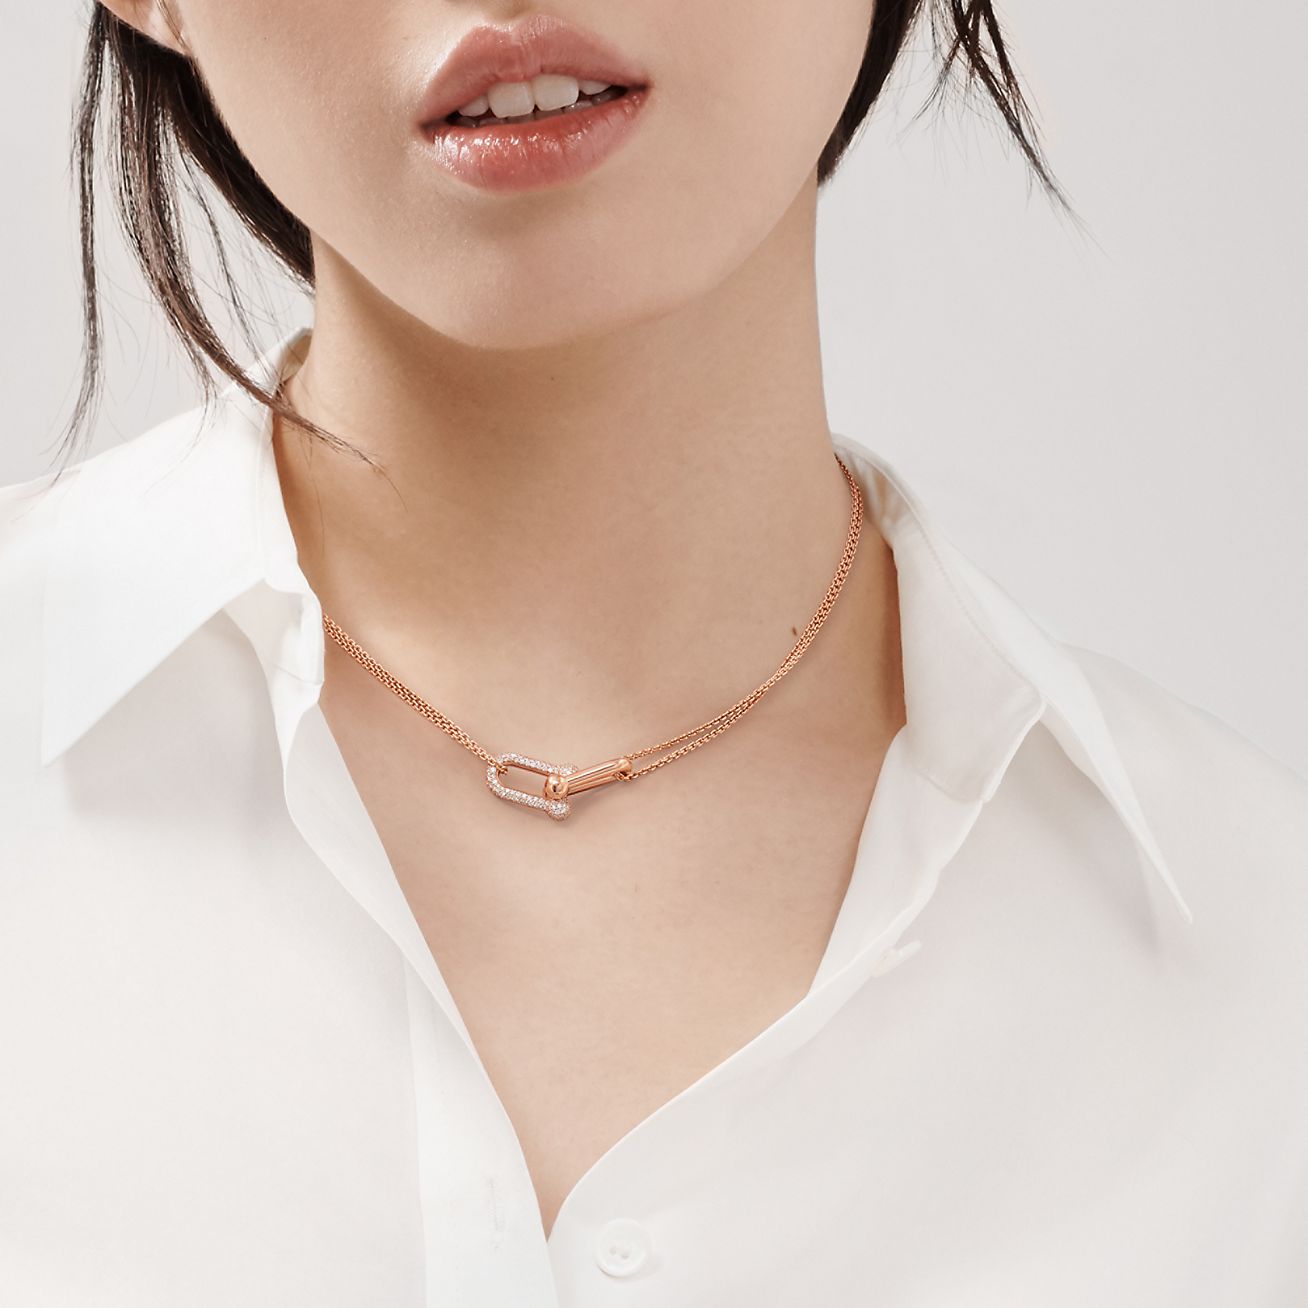 Tiffany HardWear Small Link Necklace in Rose Gold | Tiffany & Co.